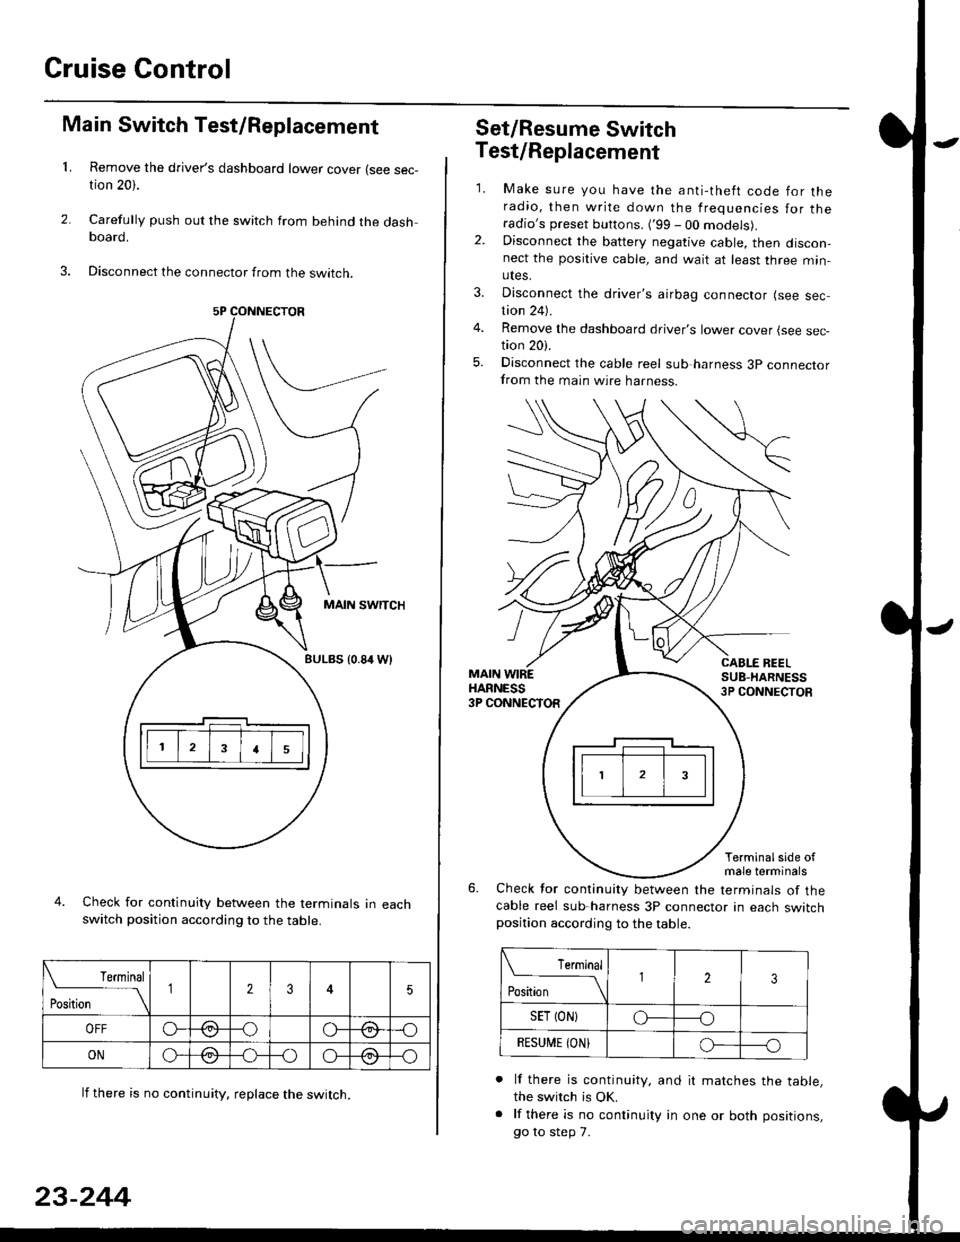 HONDA CIVIC 1996 6.G User Guide Cruise Gontrol
3.
1.
2.
Main Switch Test/Replacement
Remove the drivers dashboard lower cover (see sec-tion 20).
Carefully push out the switch from behind the dashboard.
Disconnect the connector from